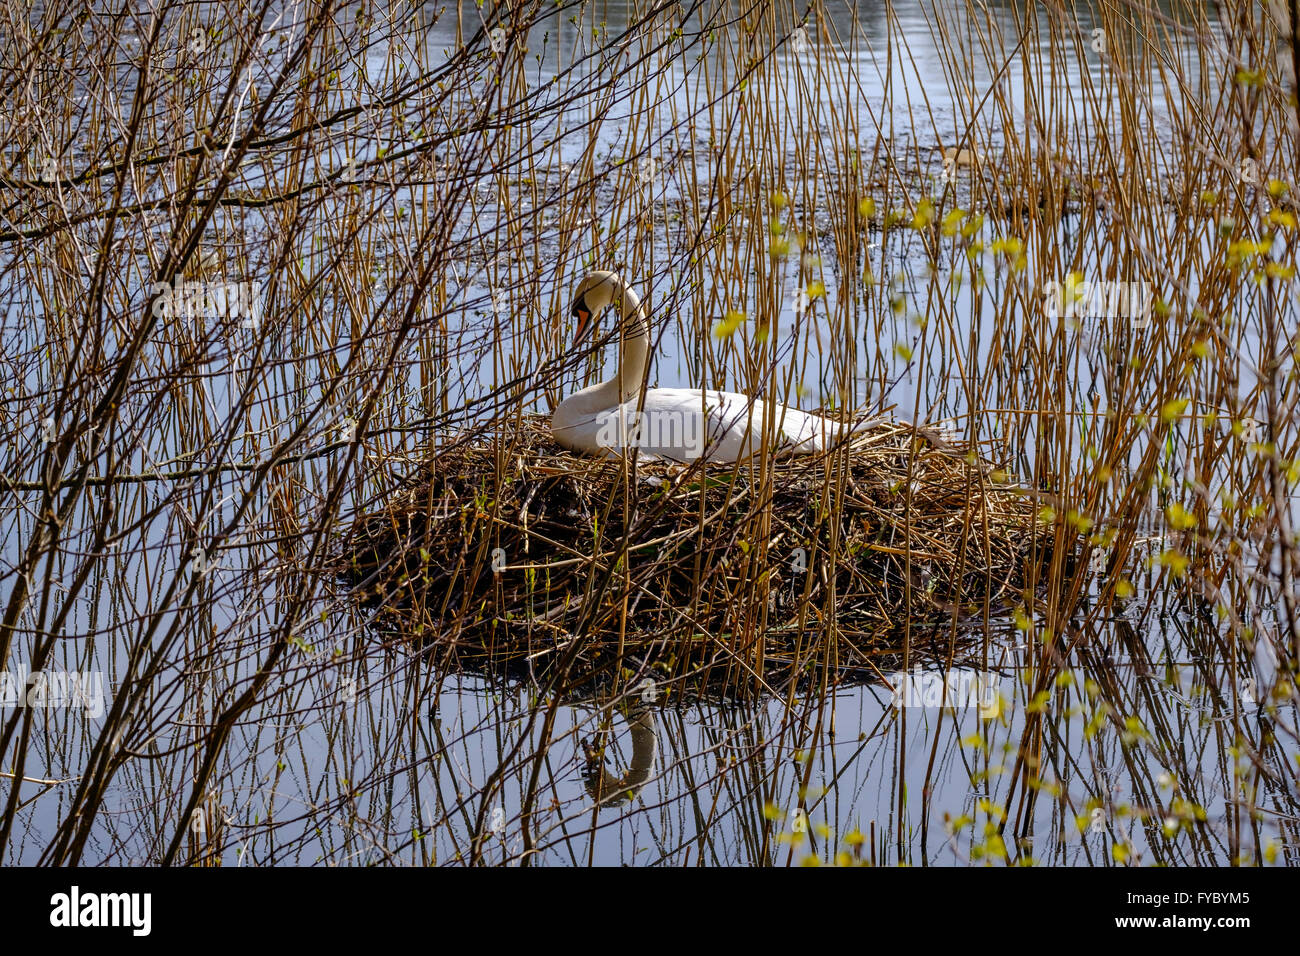 Mute swan sitting on nest of reeds floating among reeds in Cannop Ponds, Forest of Dean Gloucestershire Engalnd UK Stock Photo